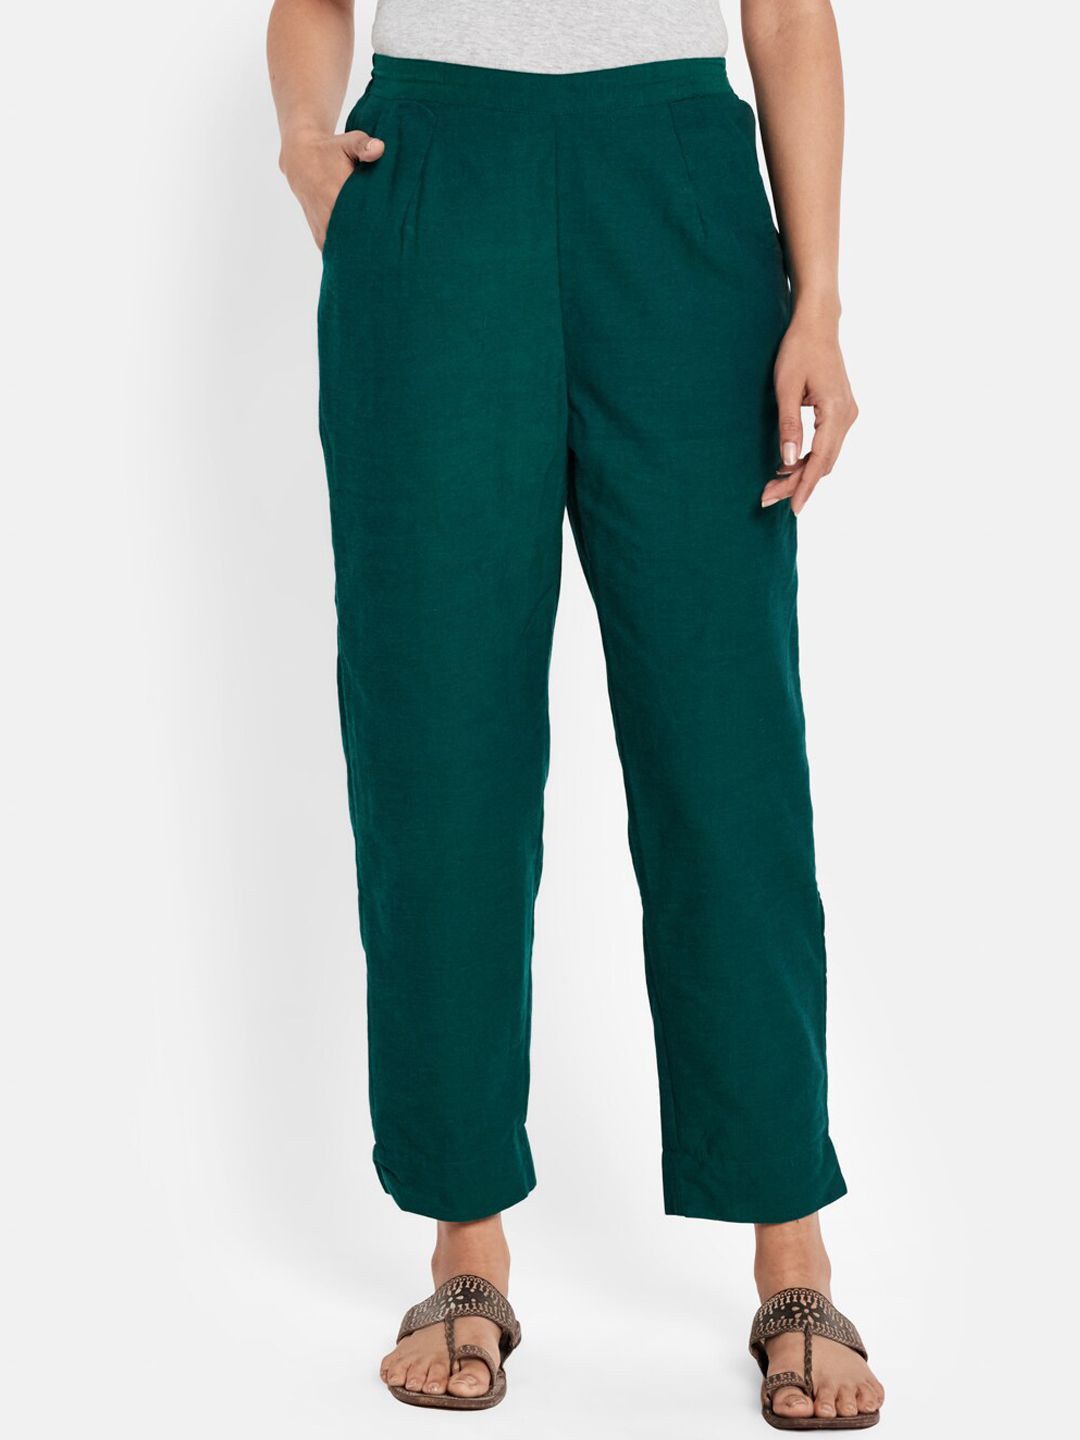 Fabindia Women Green Pleated Cropped Cotton Peg Trousers Price in India